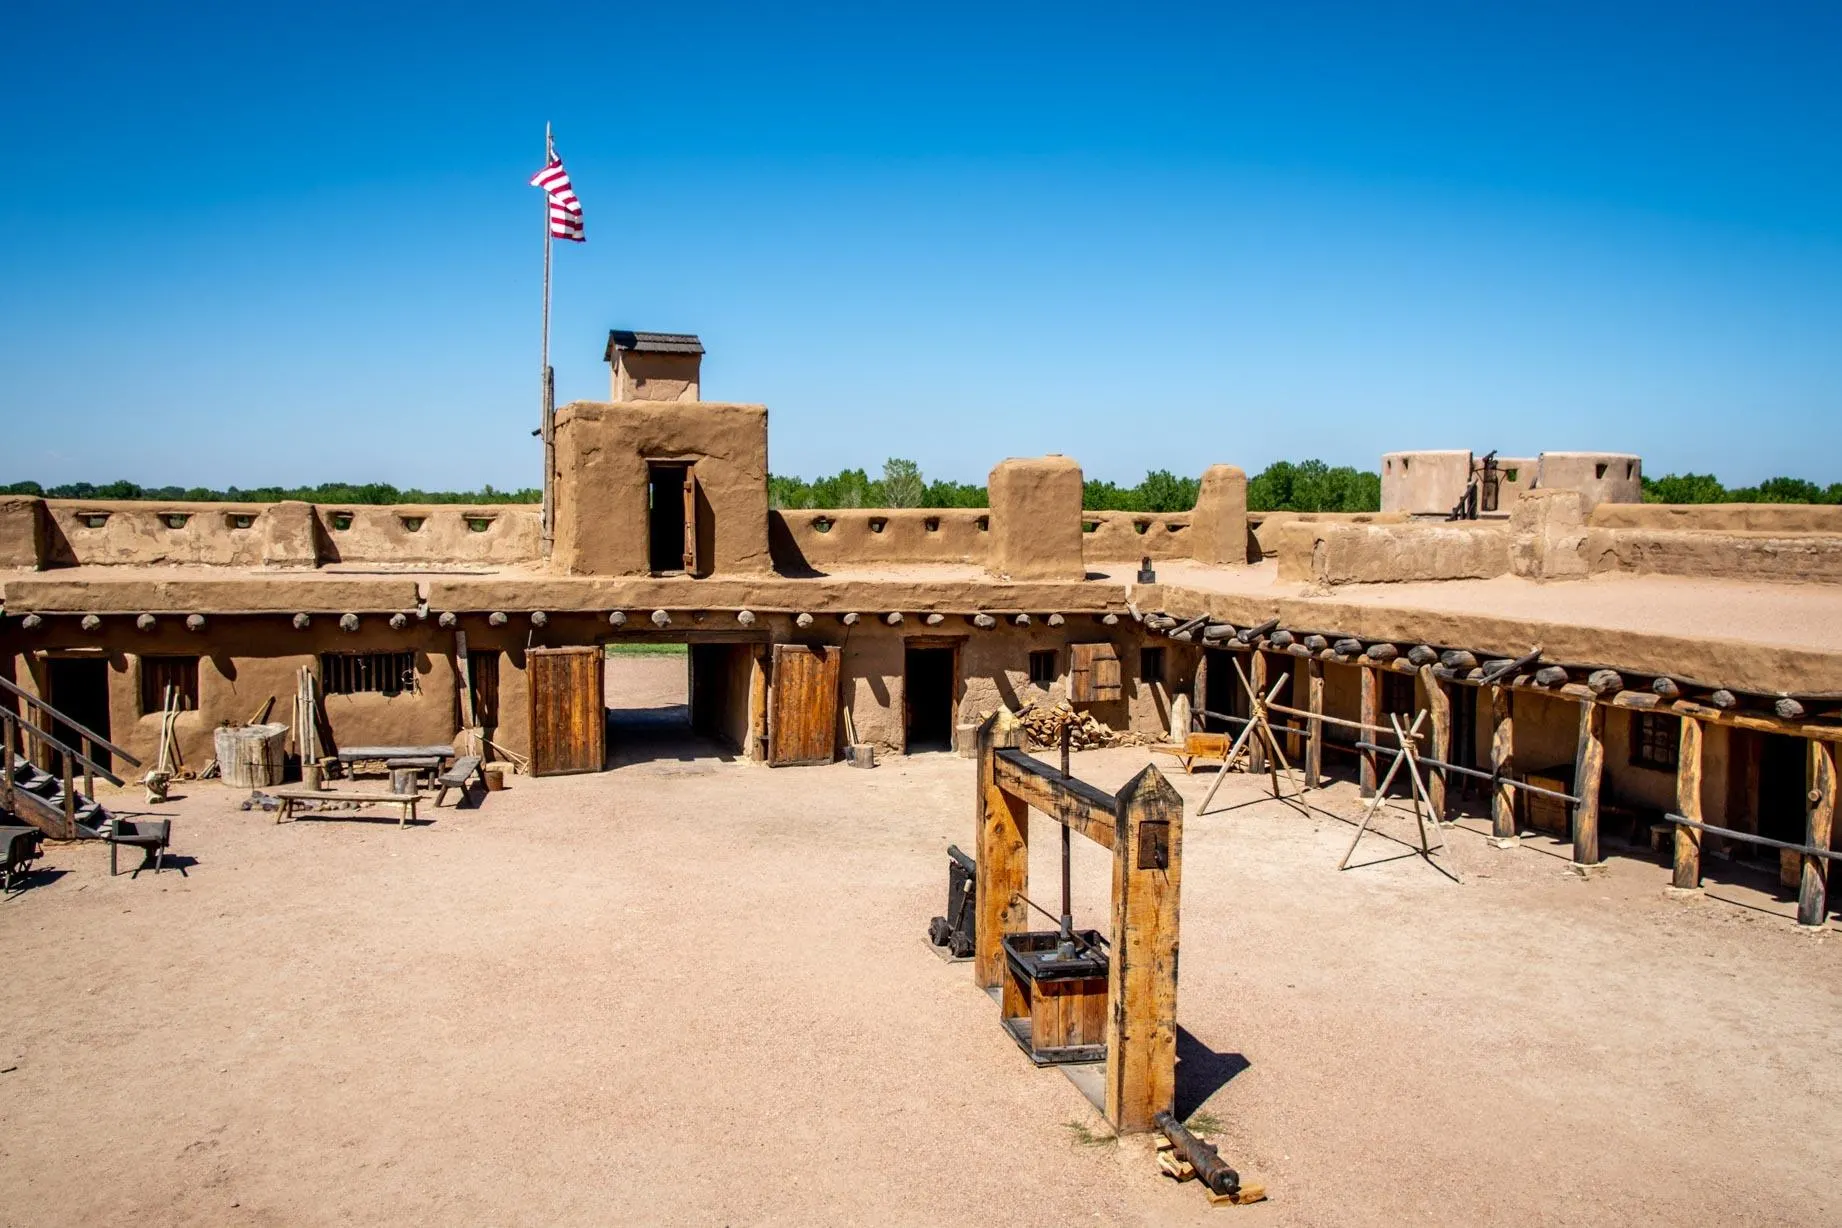 Bent's Old Fort courtyard with American flag